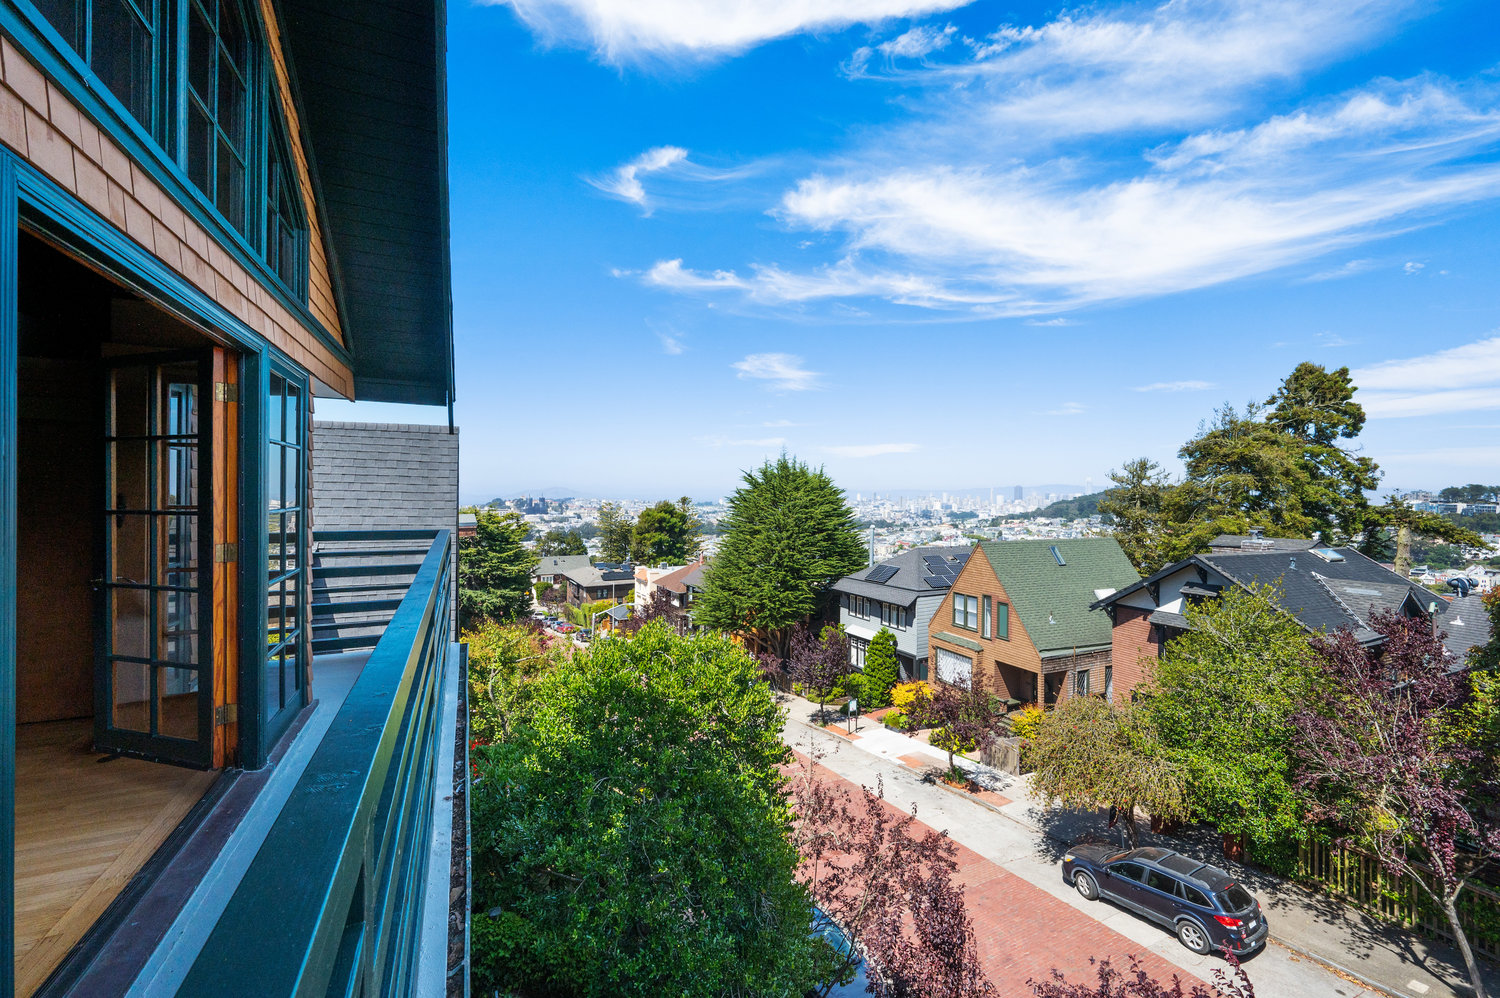 View of Edgewood Avenue and Cole Valley beyond